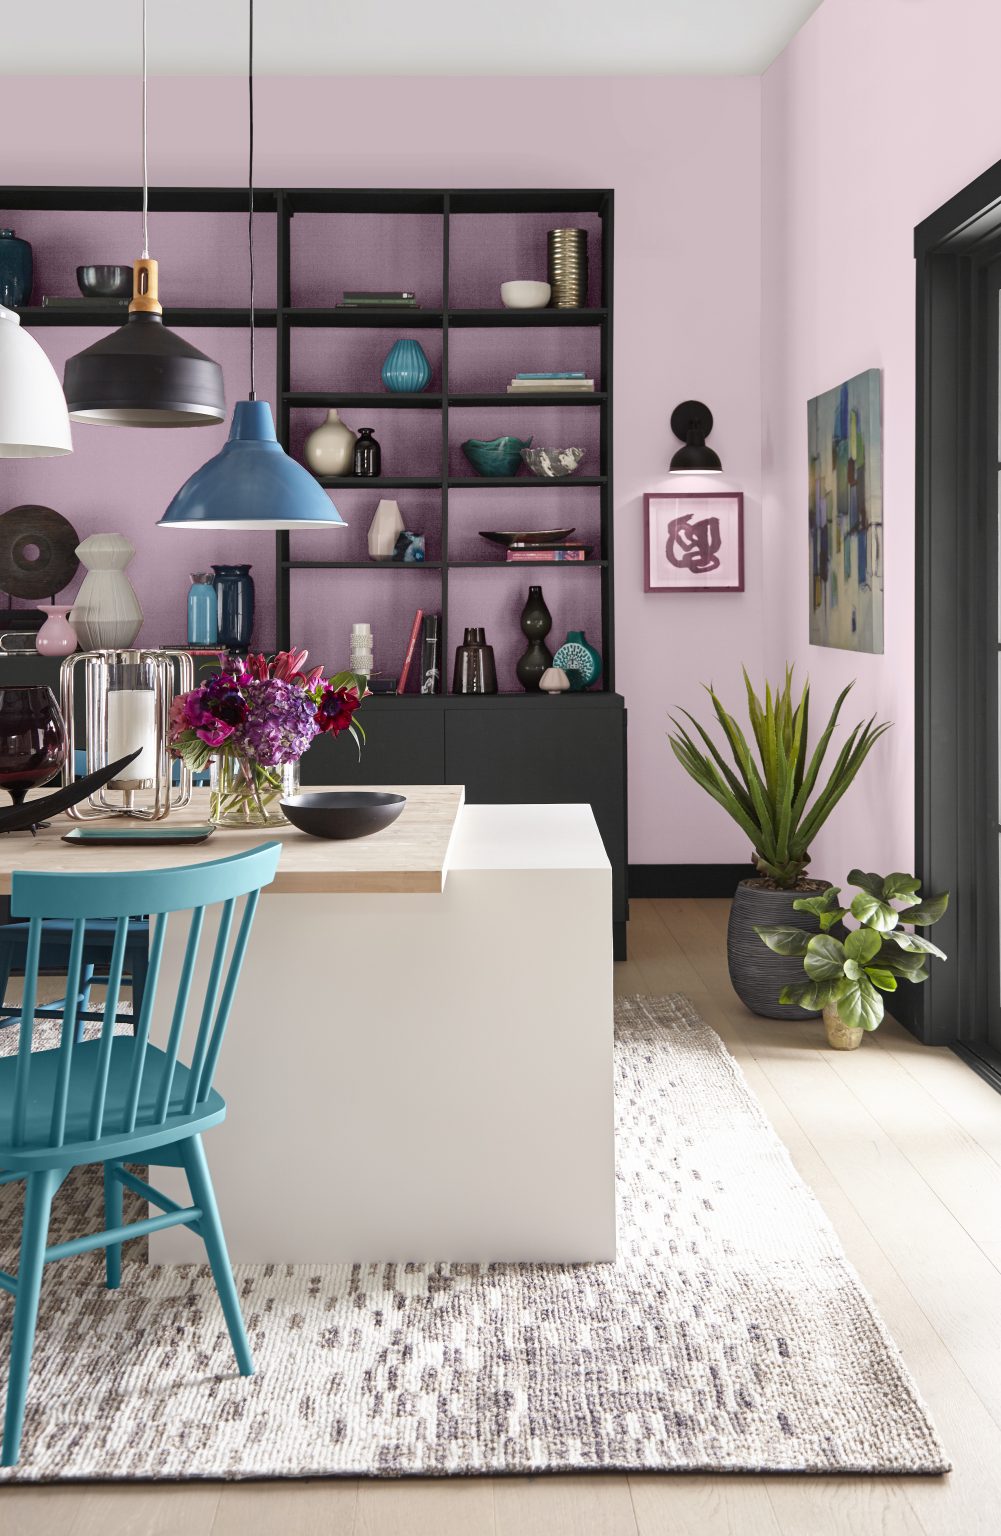 A dining area with walls painted in a pink-lavender colour and black built-in cabinets